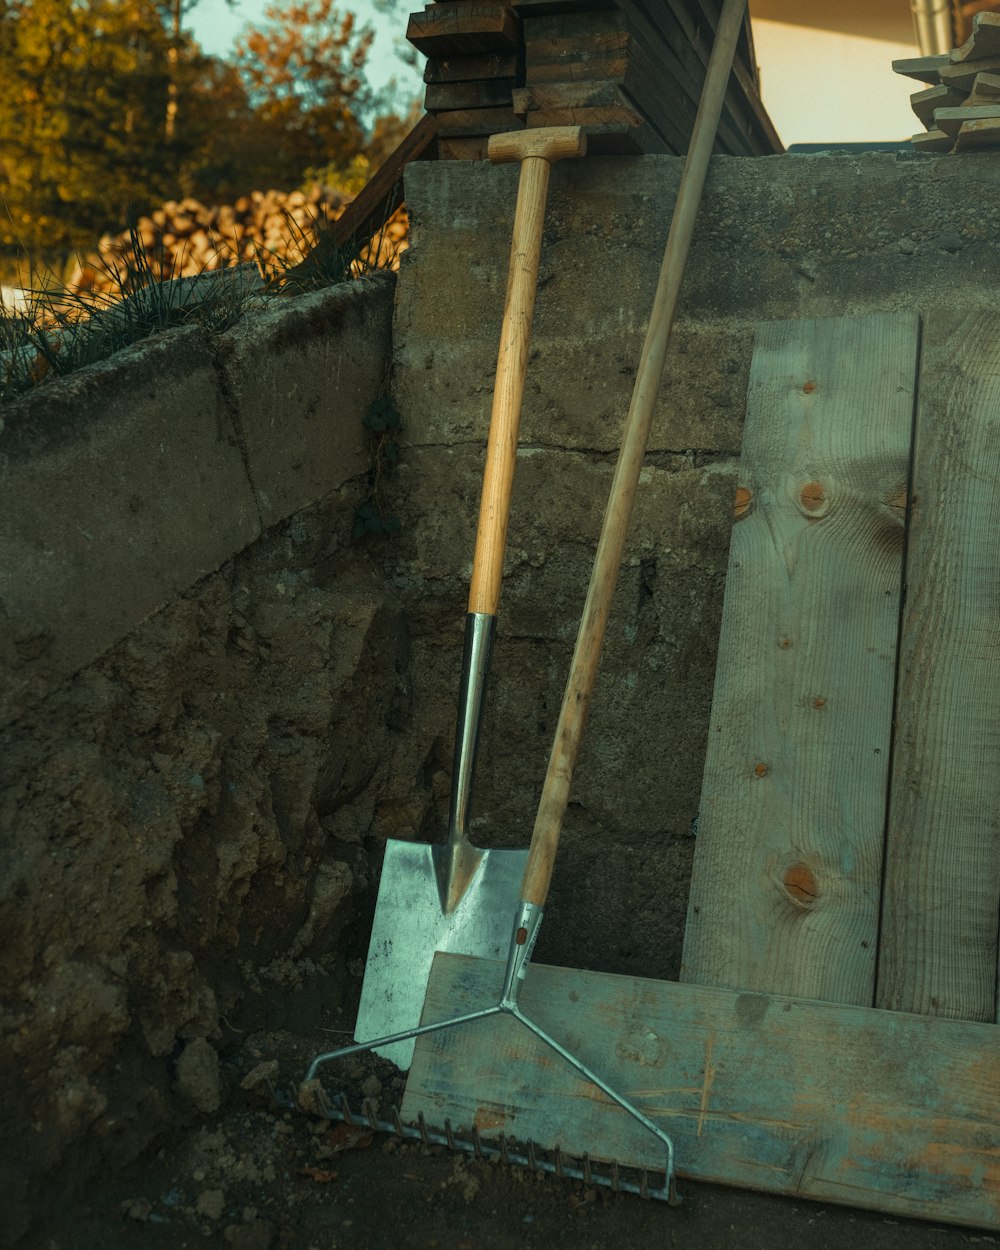 a shovel leaning against a wall next to a pile of wood